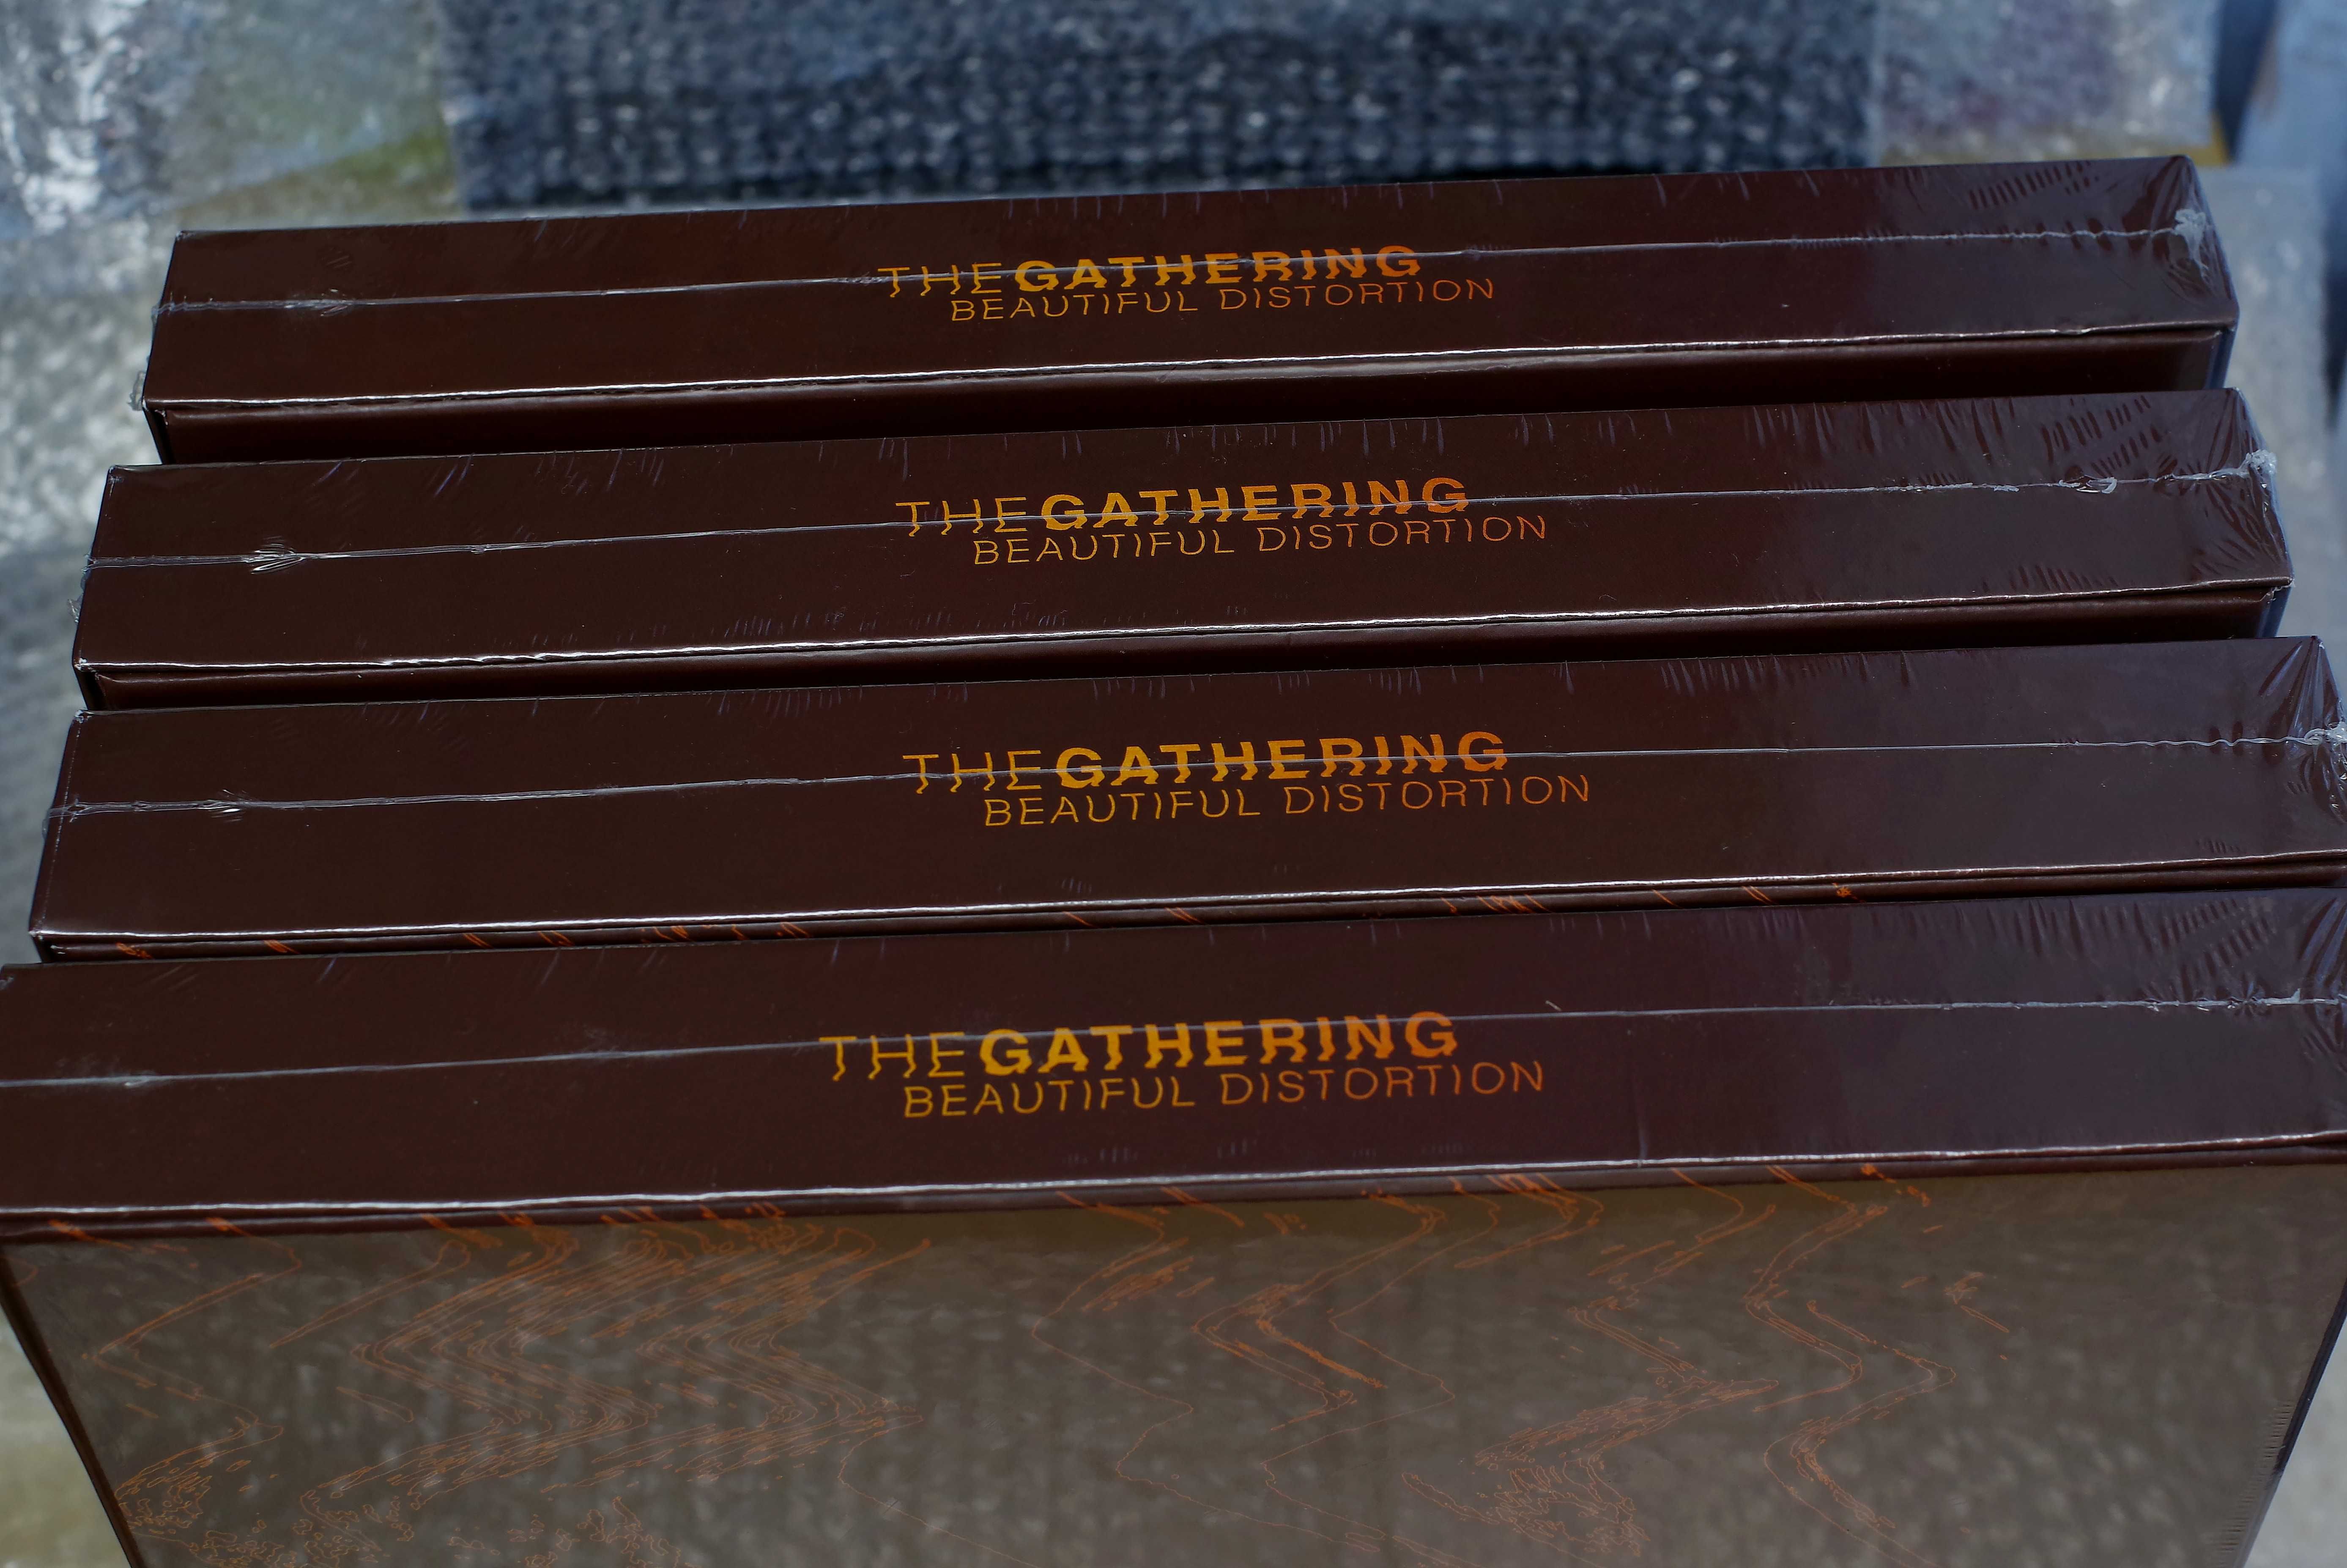 The Gathering - "Beautiful Distortion" BOX. NOWY.